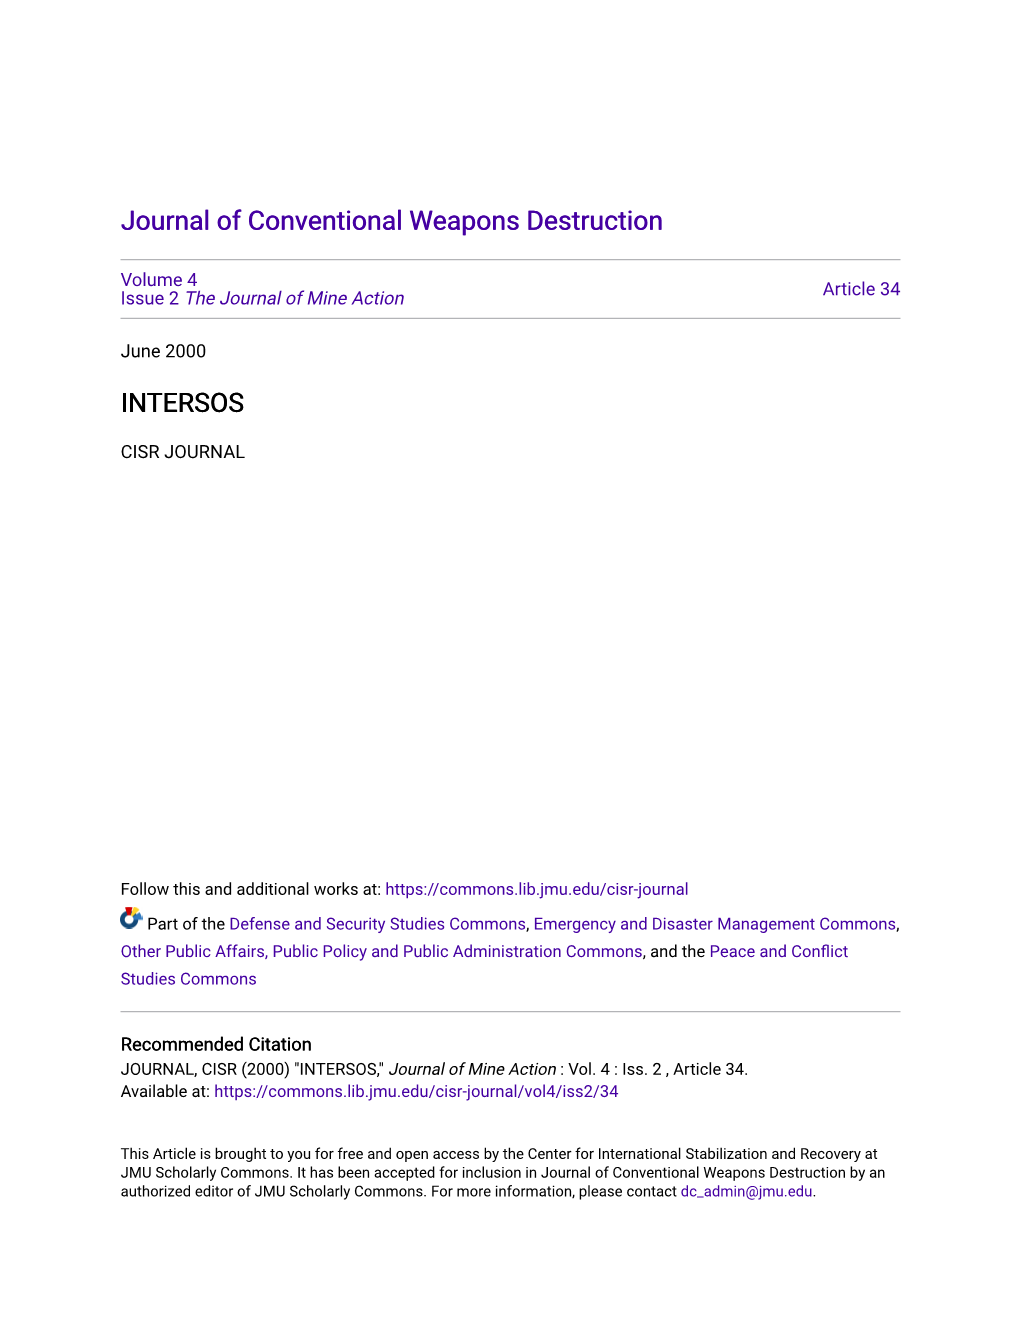 Journal of Conventional Weapons Destruction INTERSOS